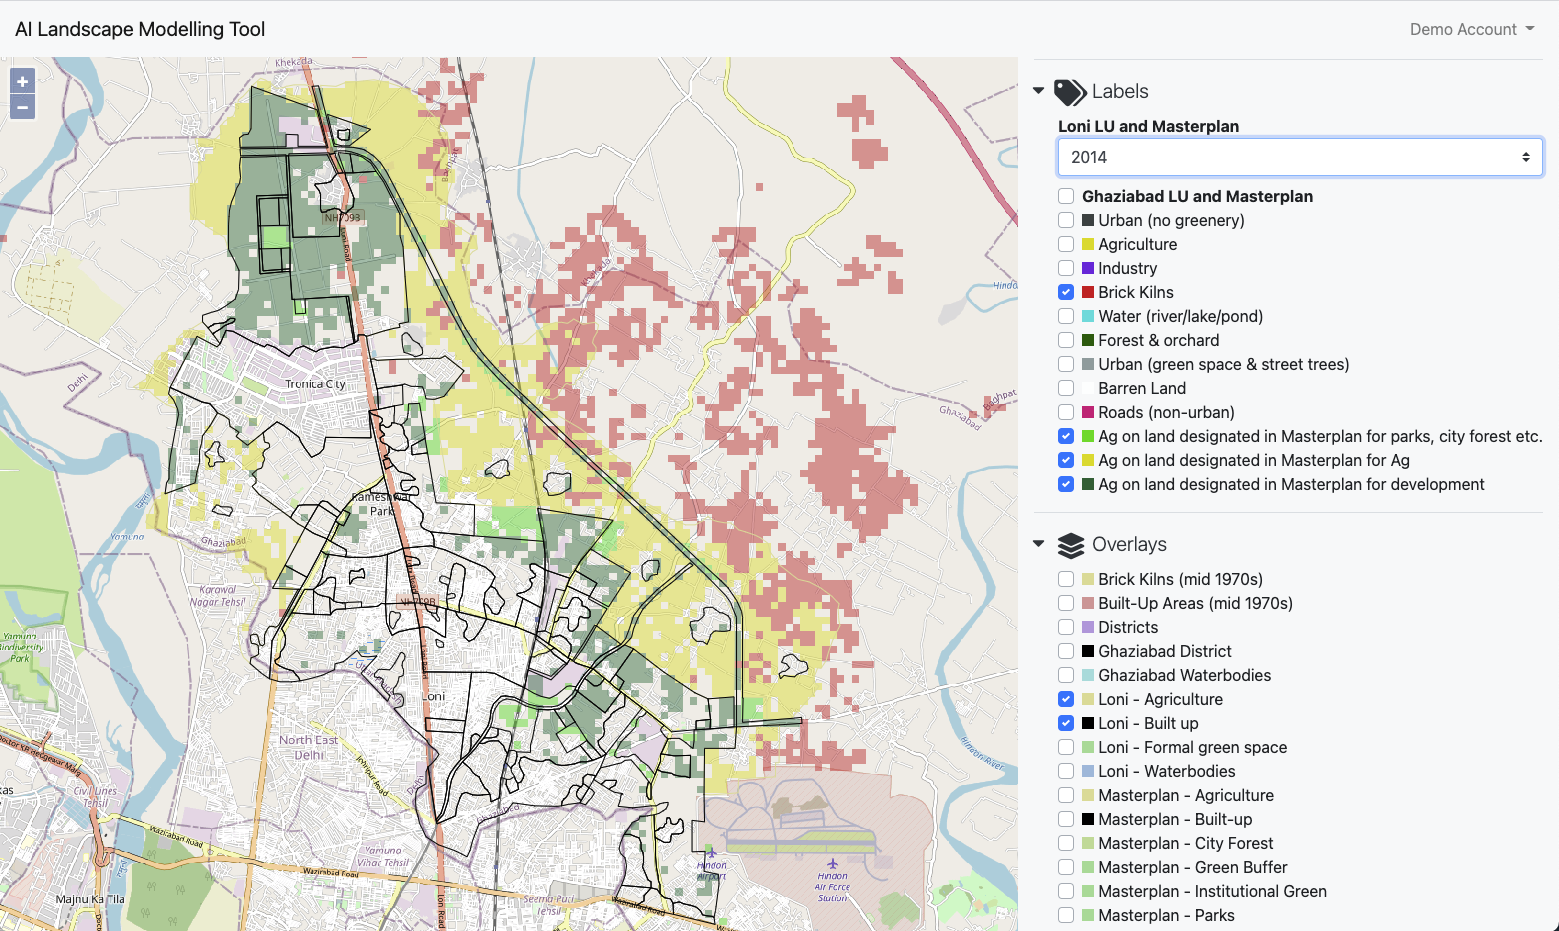 Ghaziabad land-use classification and masterplan